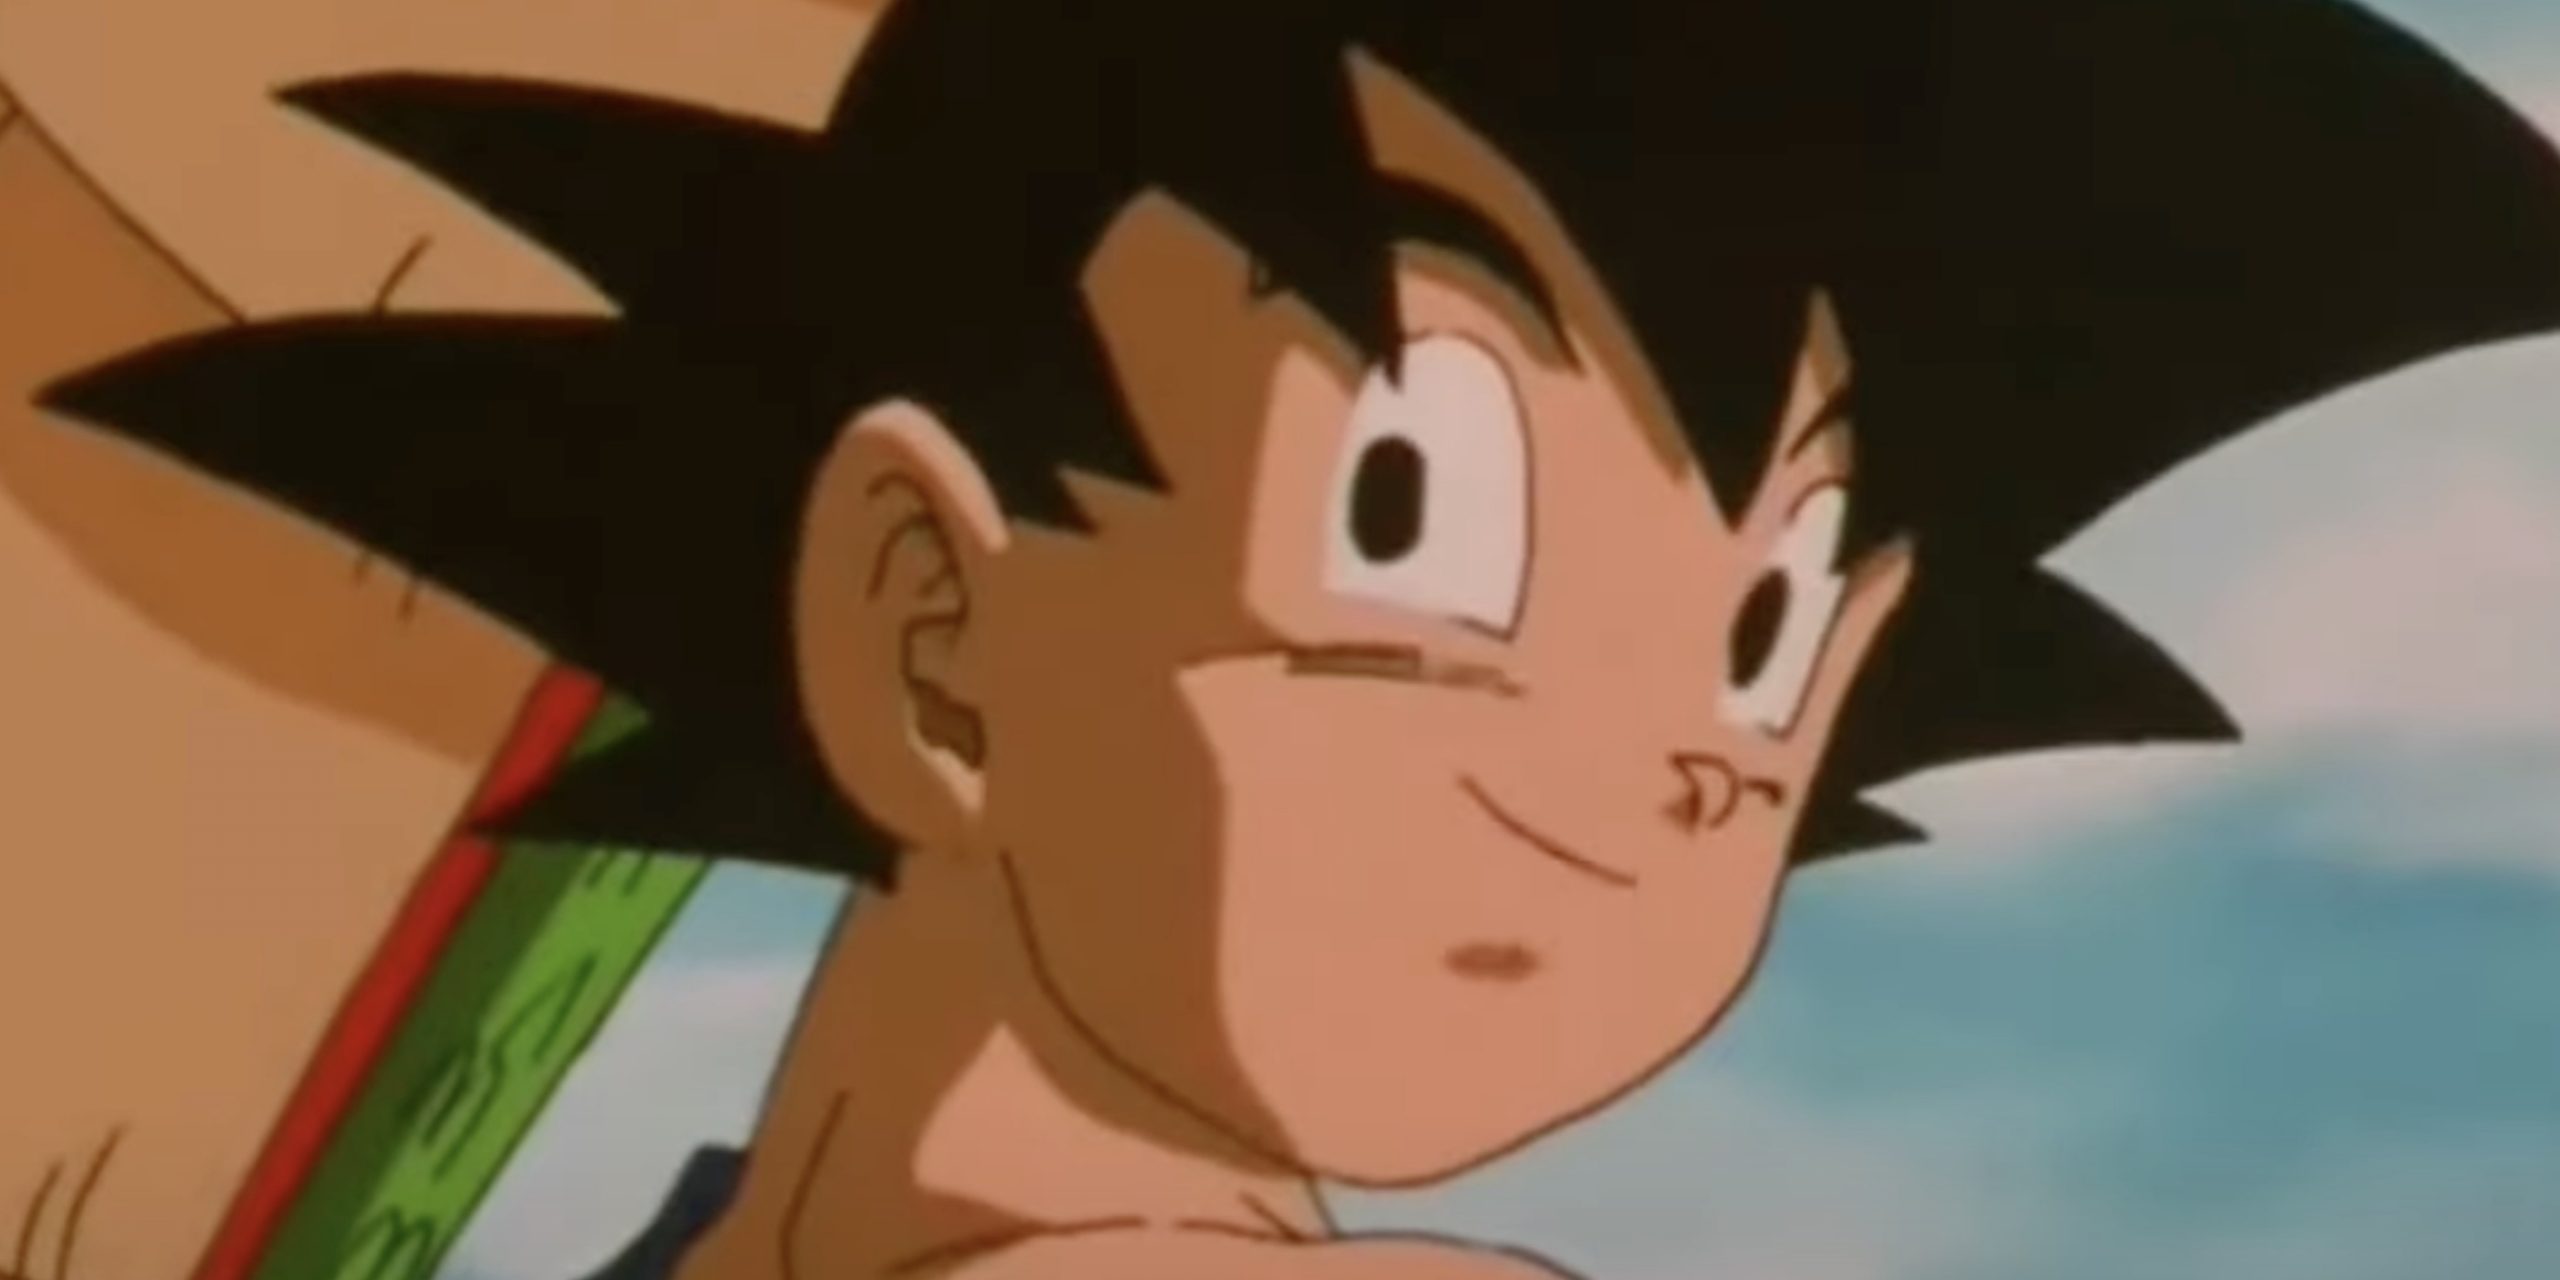 What Happened To Goku At The End of Dragon Ball GT?